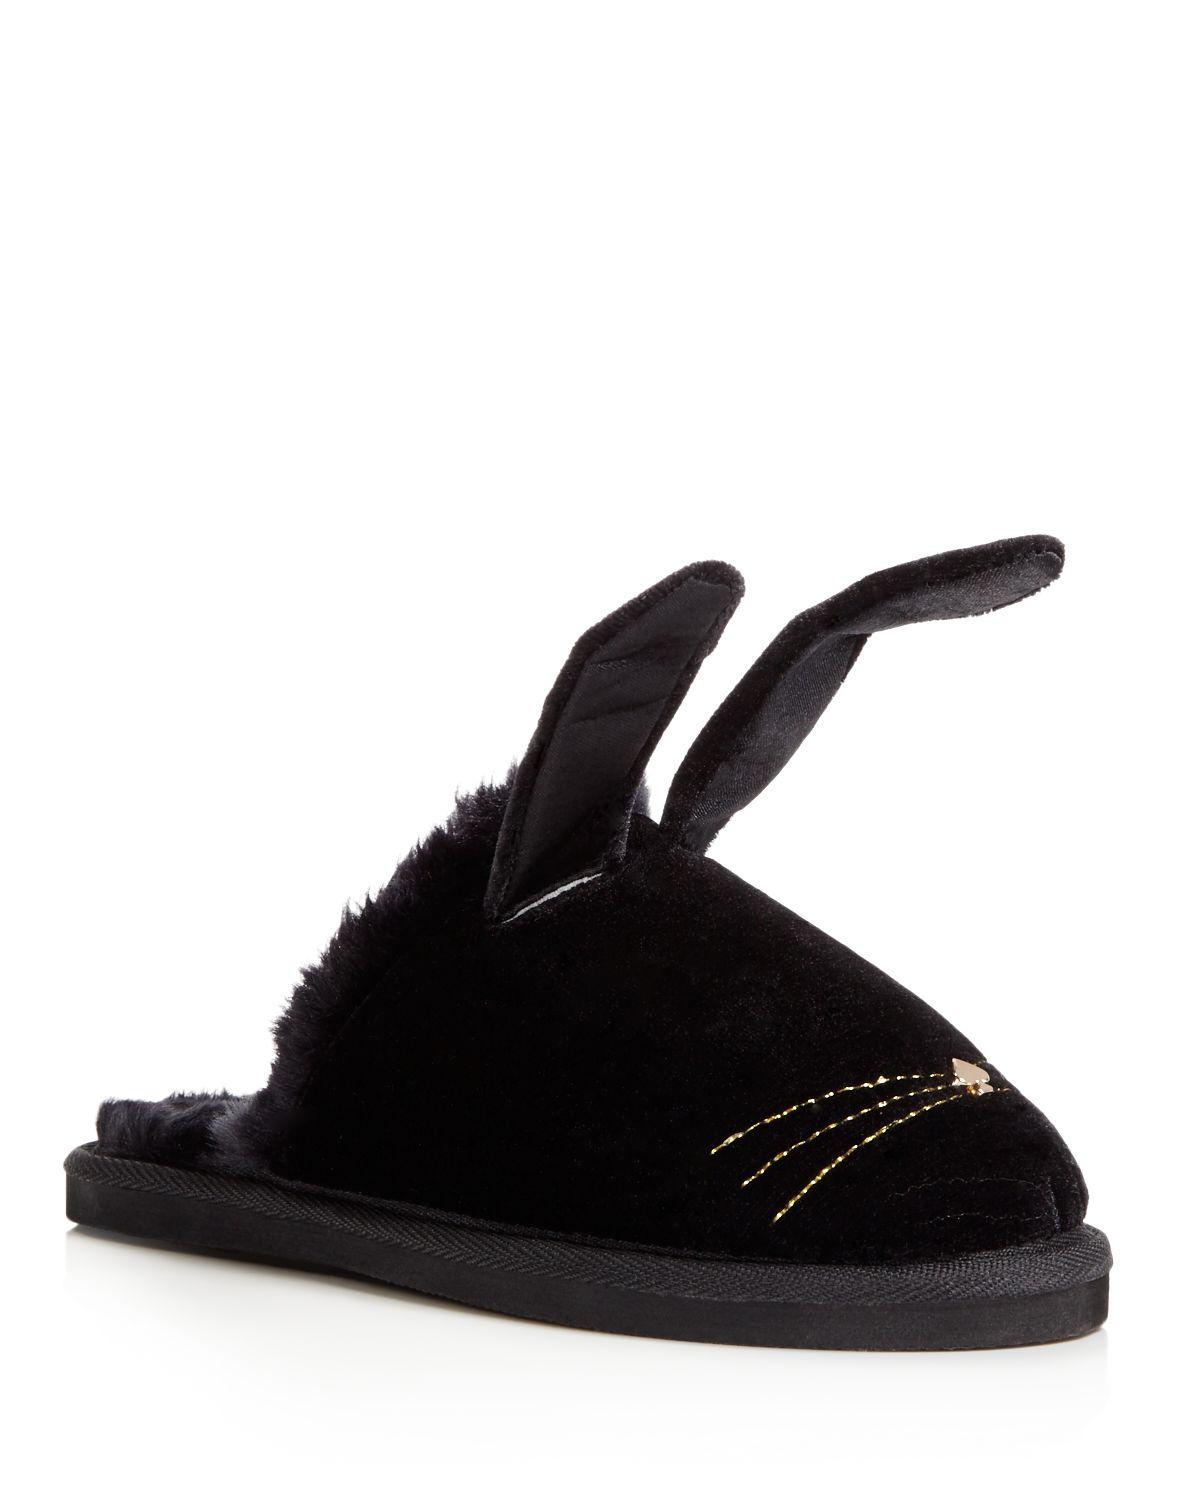 Kate Spade Bunny Slippers U.K., SAVE 43% - aveclumiere.com